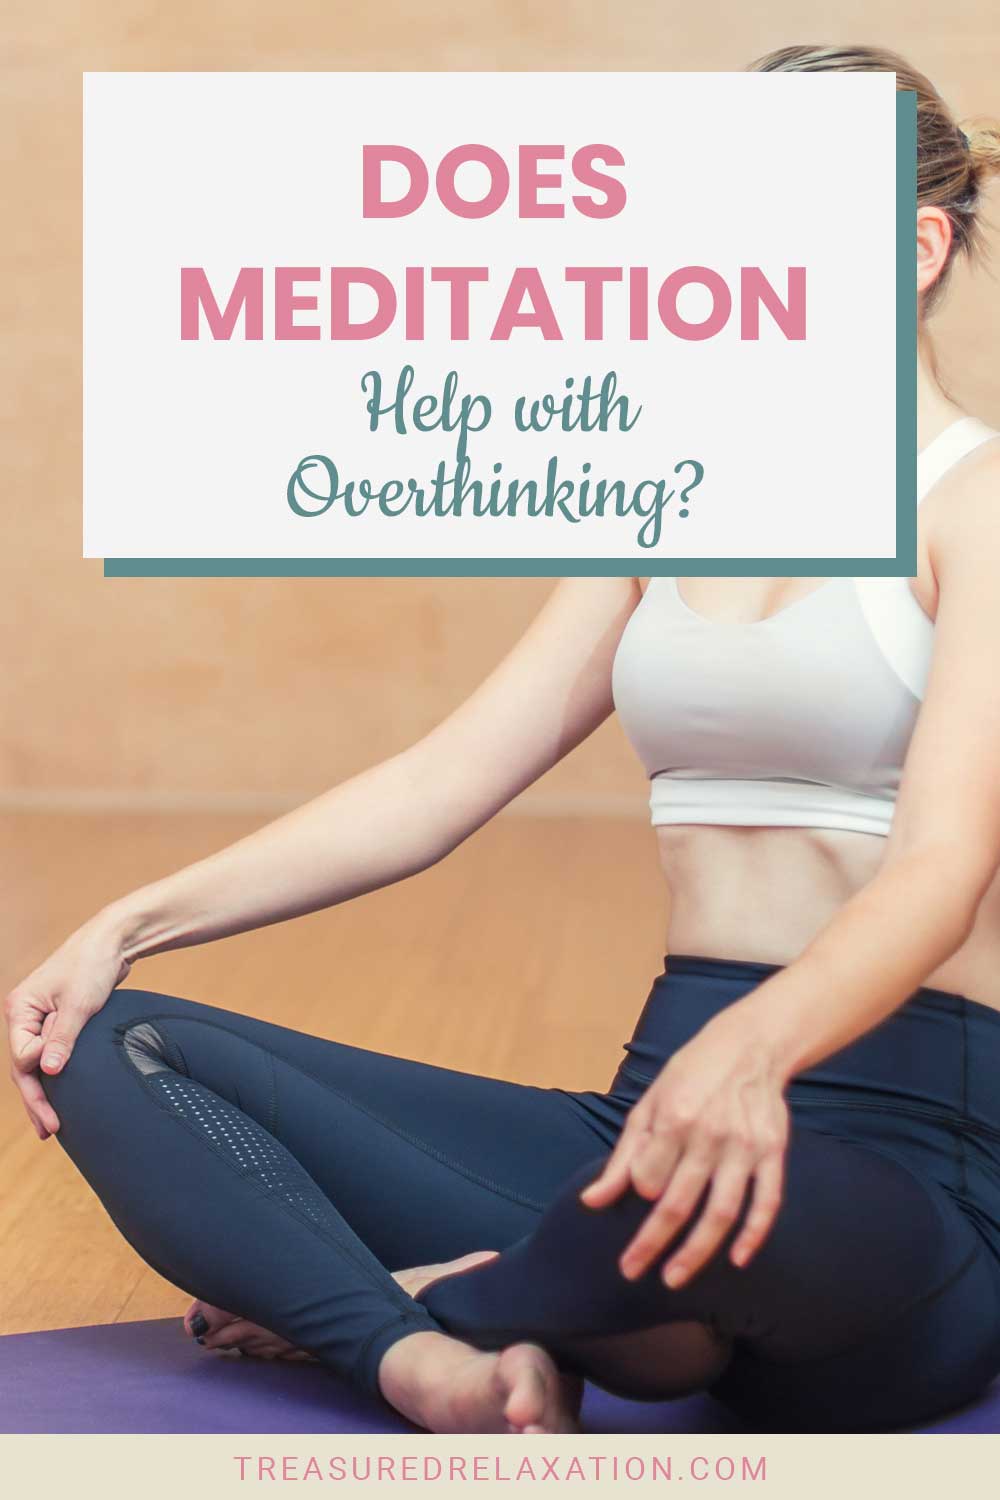 Woman in white top and blue tights meditating - Does Meditation Help with Overthinking?